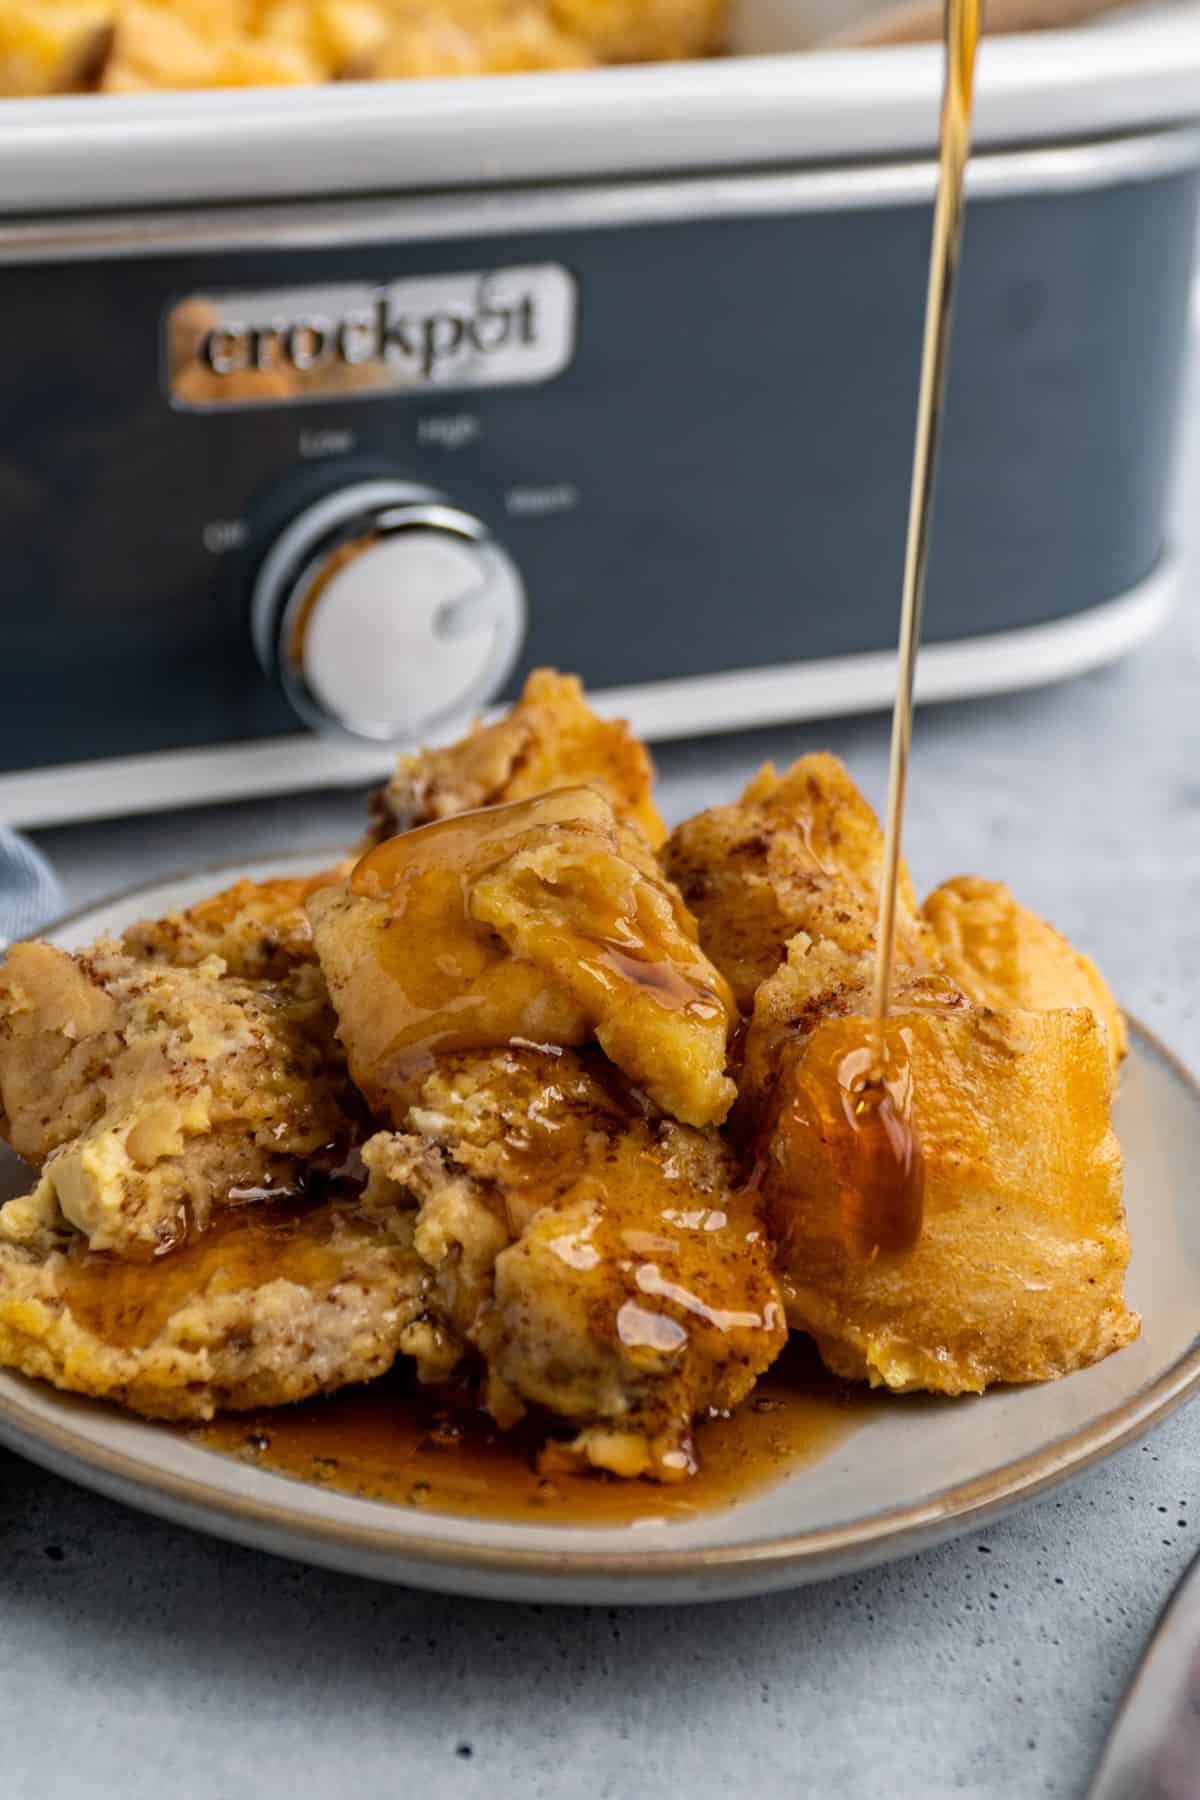 Crock-Pot French toast on a plate with maple syrup being poured on it.